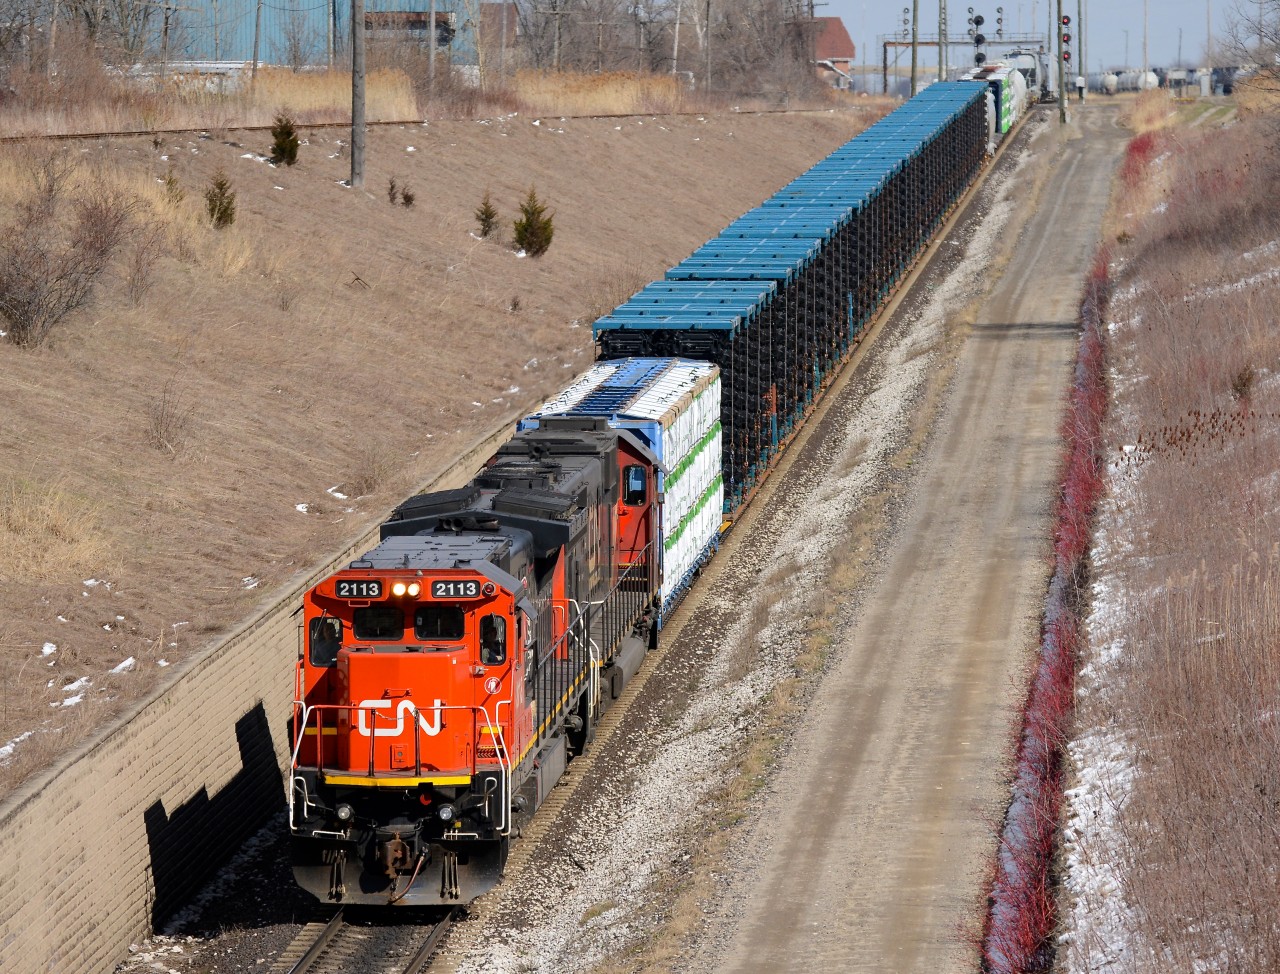 CN 2113 with IC 1012 lead train 501 west bound for Port Huron, MI., by way of the "Paul M. Tellier" St. Clair River Tunnel.